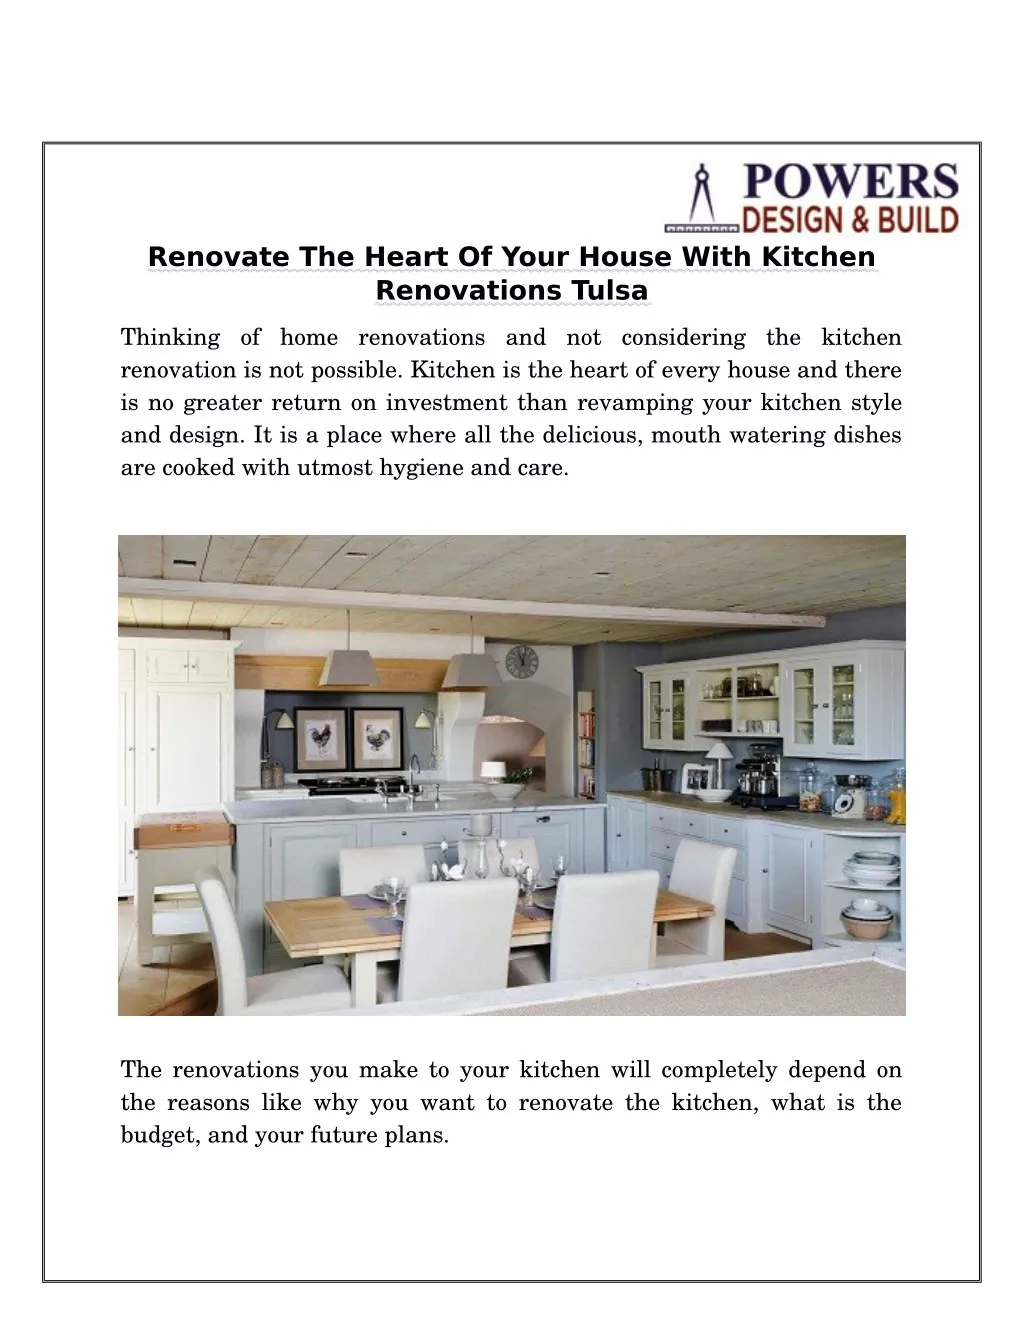 renovate the heart of your house with kitchen